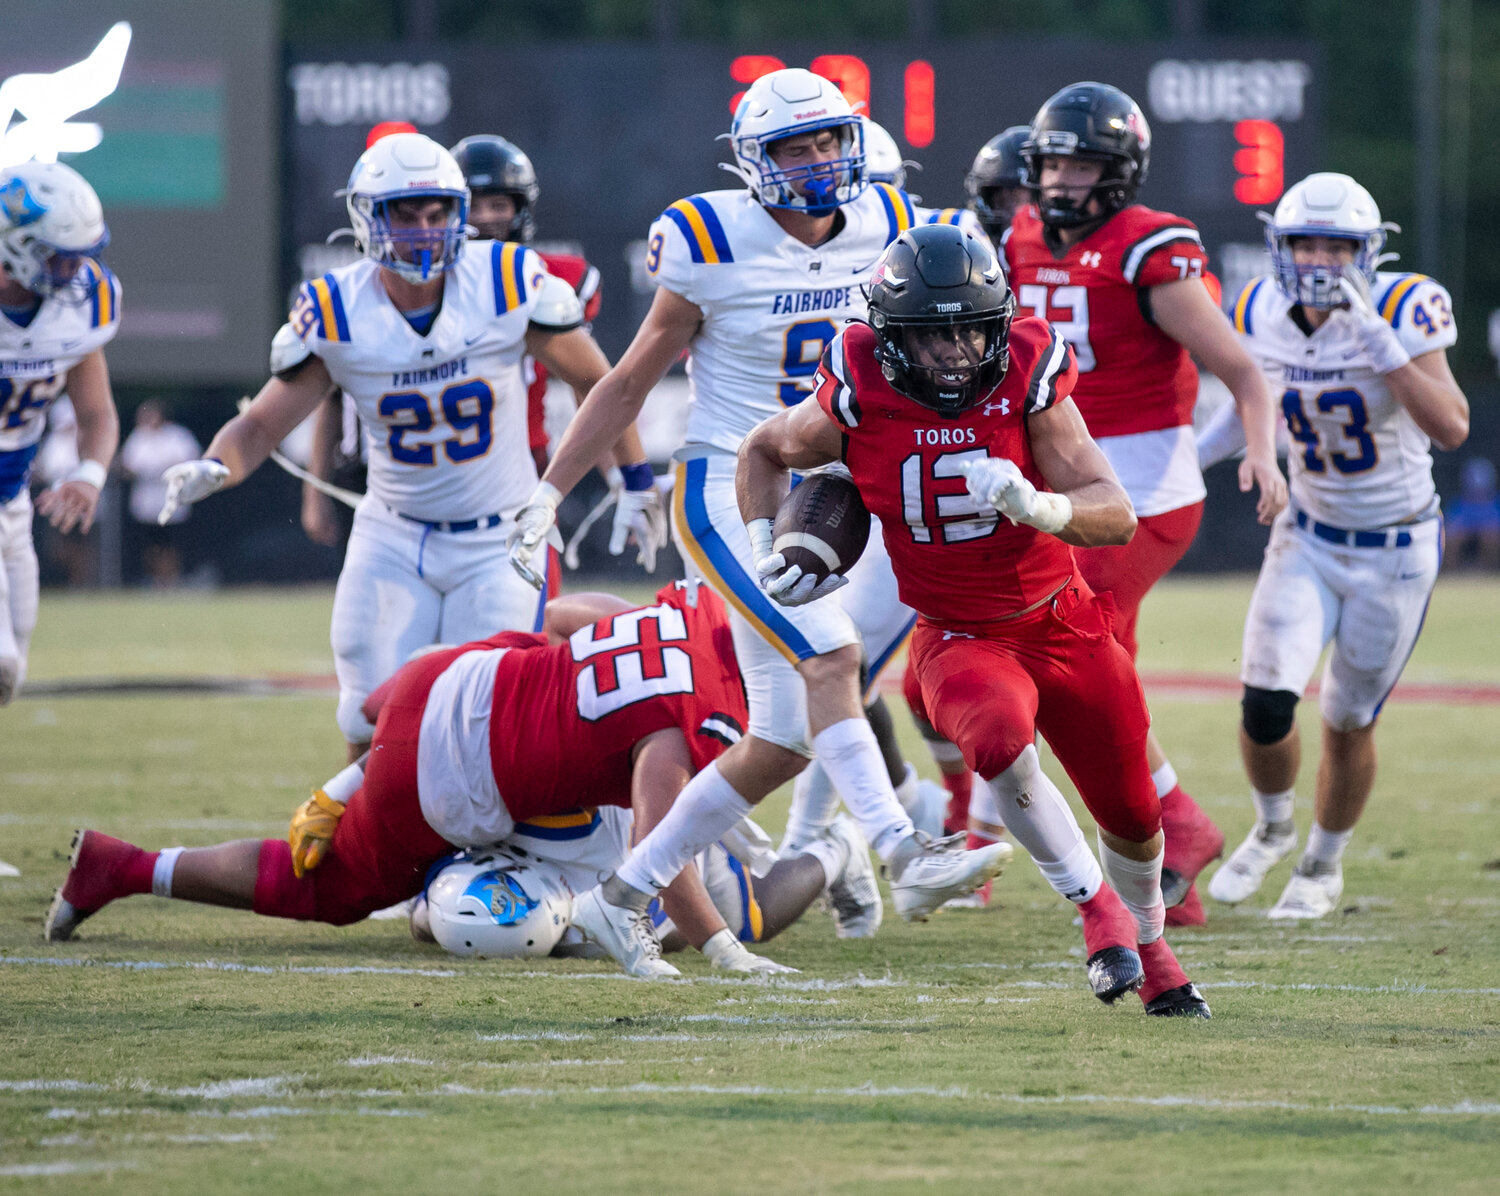 Spanish Fort junior Sawyer Wilson explodes into the second level of the defense on a carry during the Toros’ season-opening game against the Fairhope Pirates at home on Aug. 24. Wilson supplied two rushing touchdowns to Spanish Fort’s 44-0, region-opening win over Blount Friday night on The Hill.